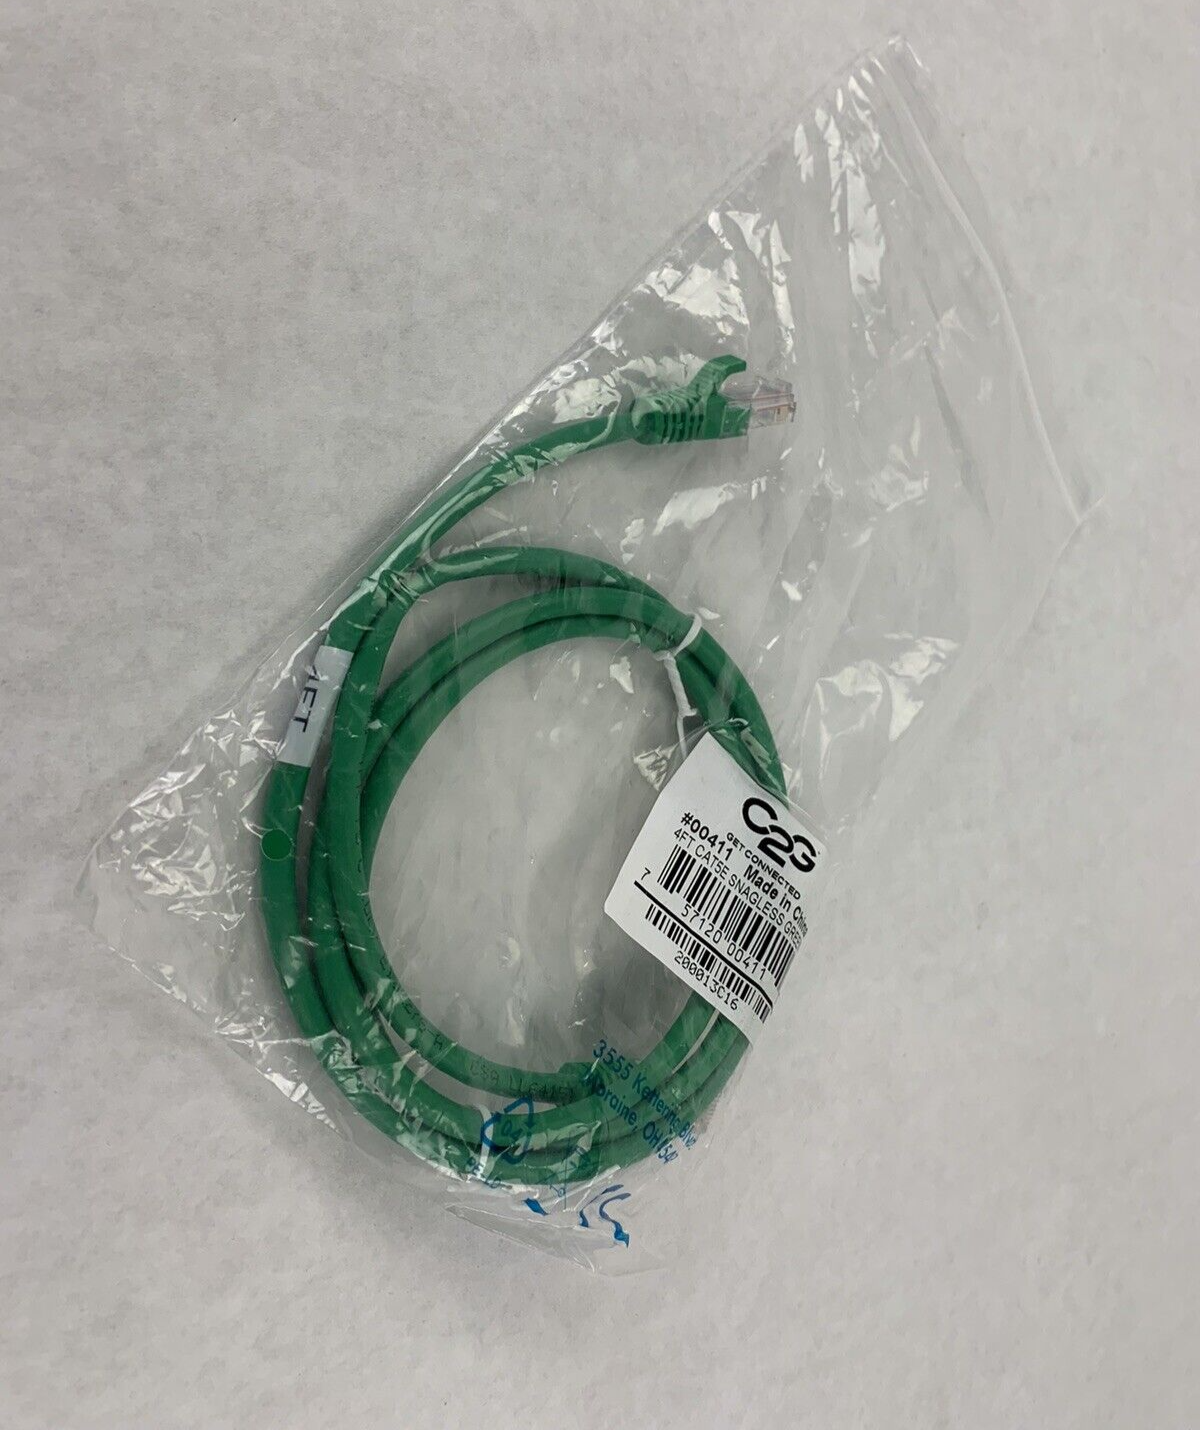 4ft Green Cat5e C2G 0041 Snagless Unshielded UTP Ethernet Patch Cable